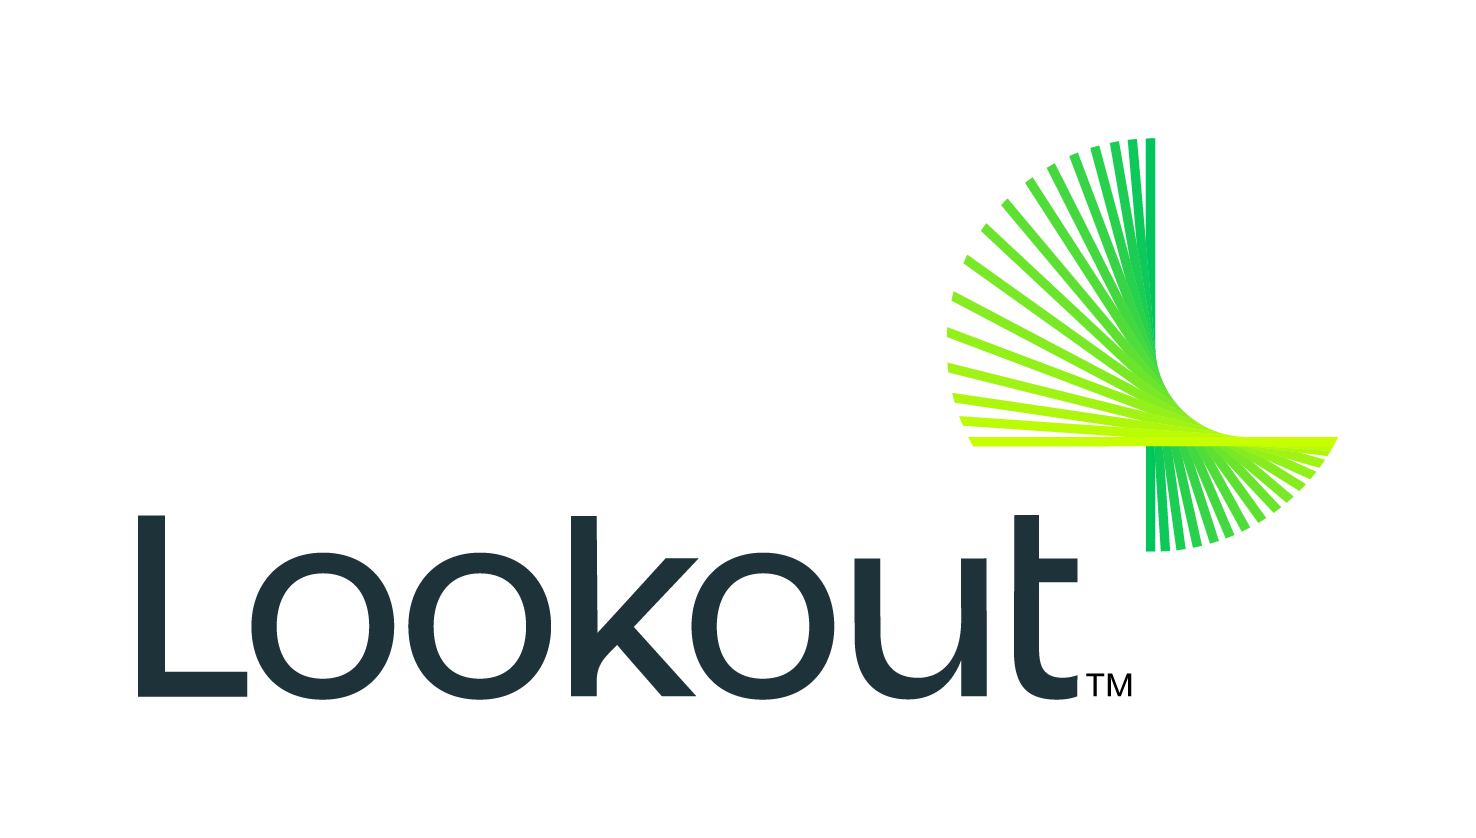 Lookout's logo